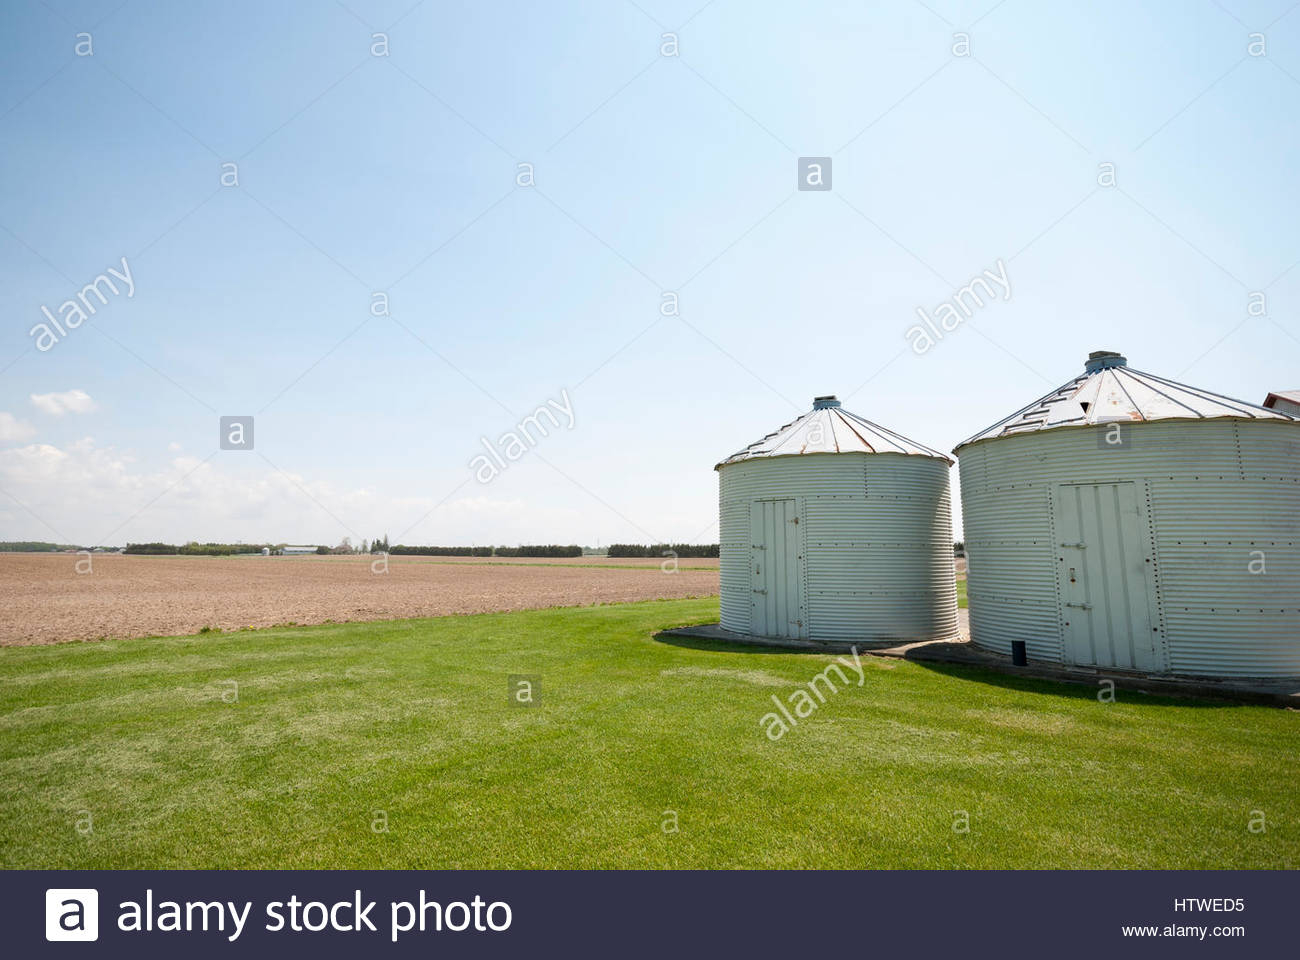 Seed Storage Bins On A Commercial Corn Farming Operation In Rural within dimensions 1300 X 960